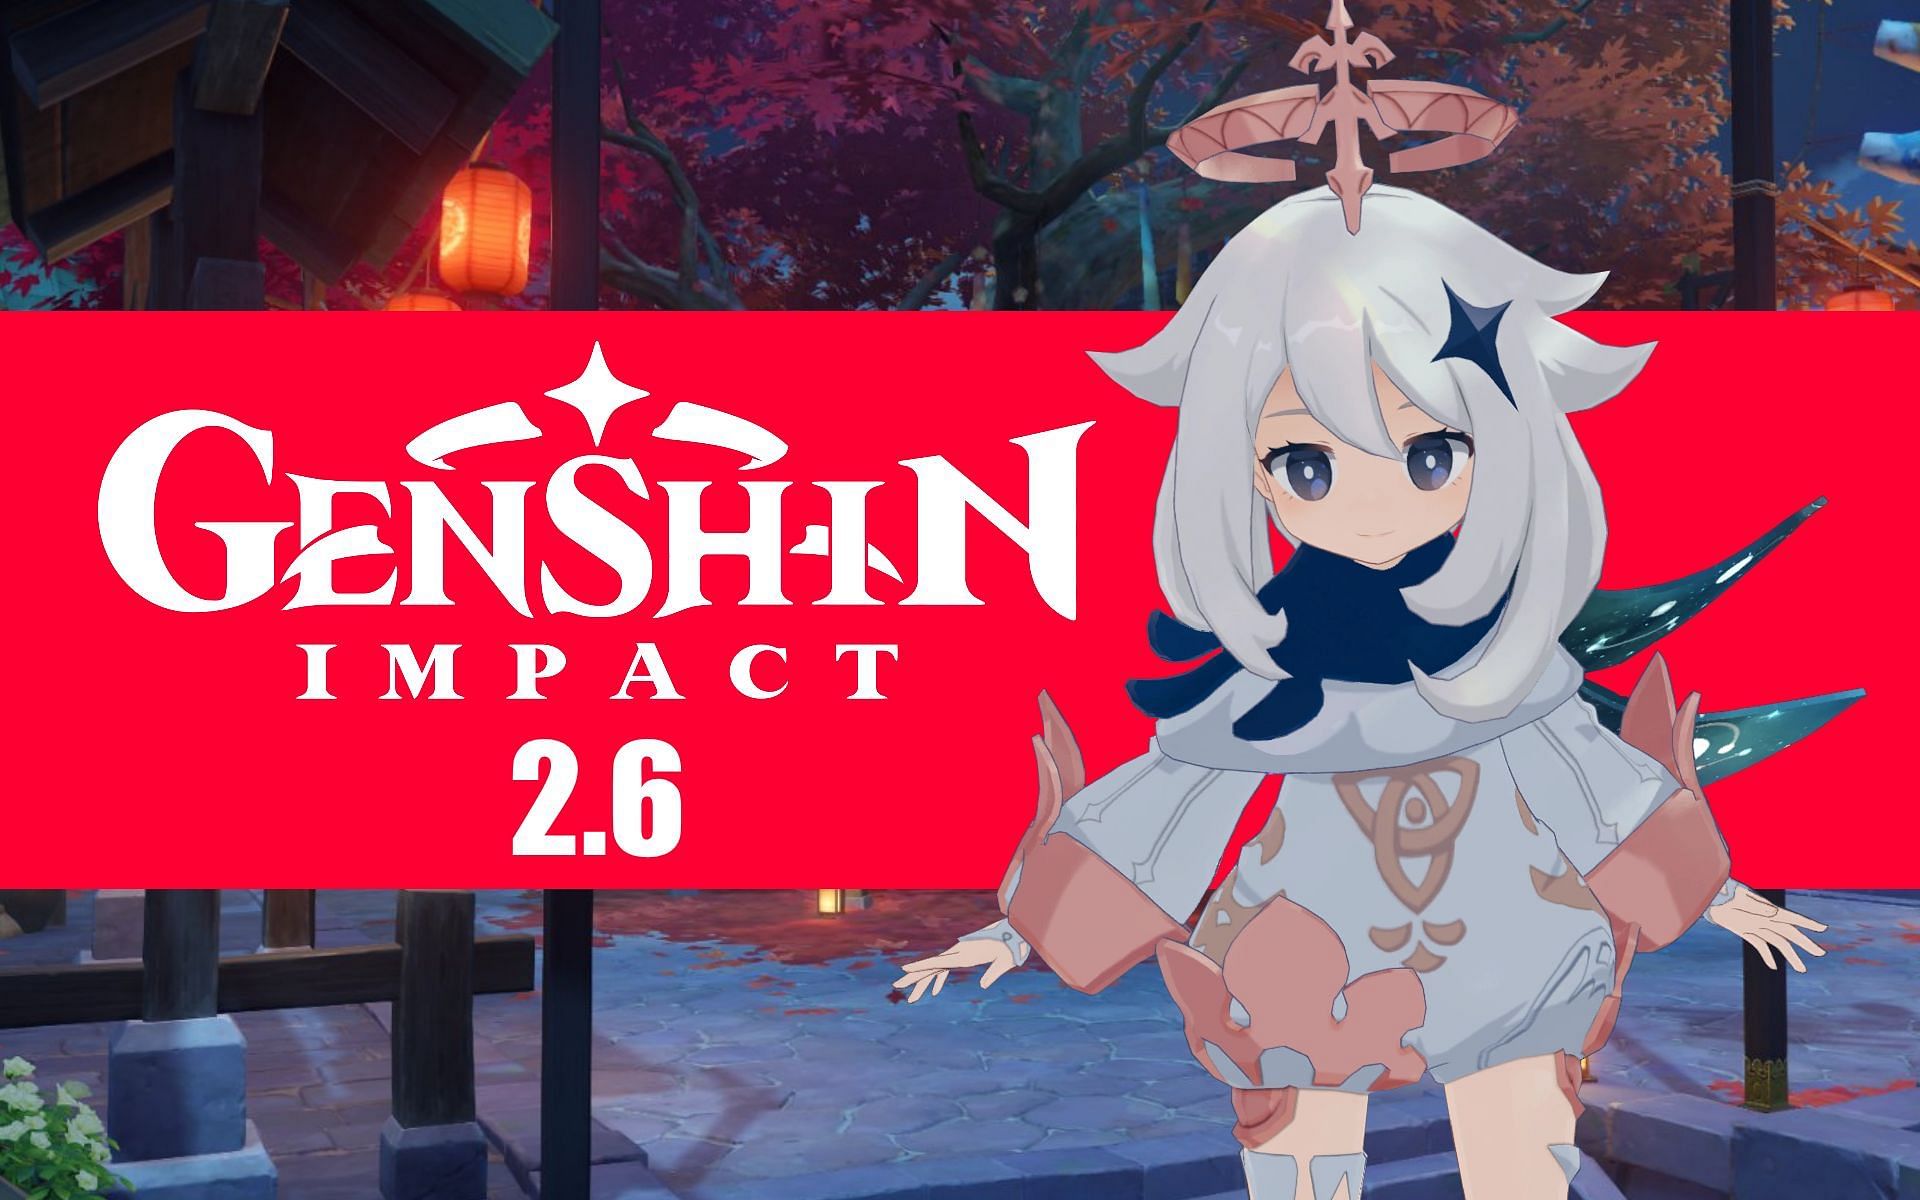 Genshin Impact 2.6 will be coming out soon (Image via miHoYo)